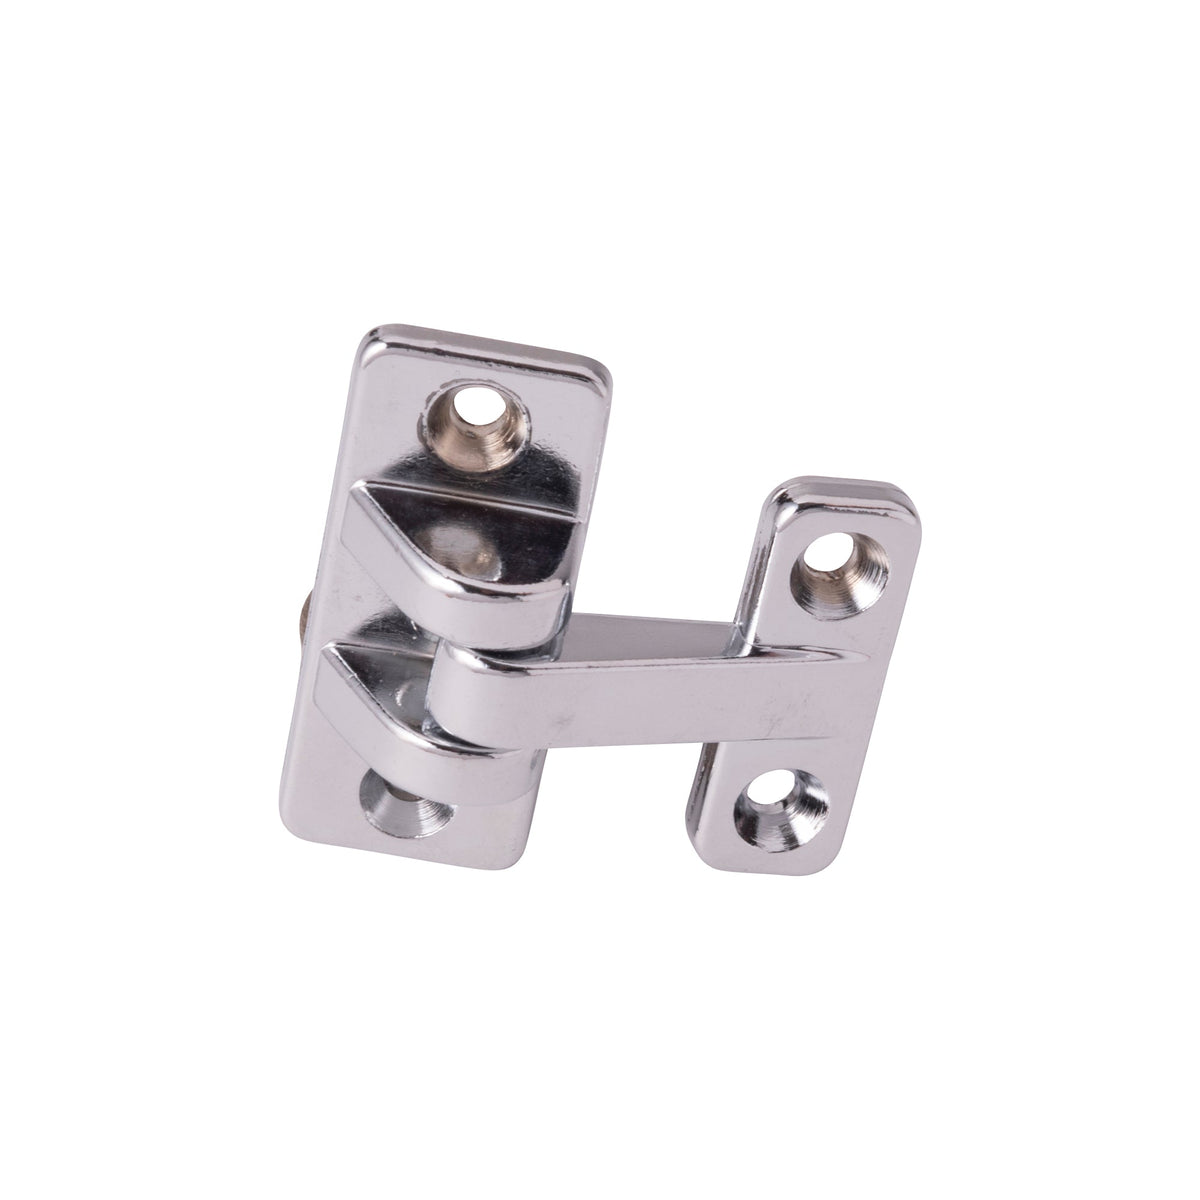 Refrigeration Hinges - Economy Zinc Die-Cast - 5/16" Inch Offset - Chrome Finish - Sold Individually